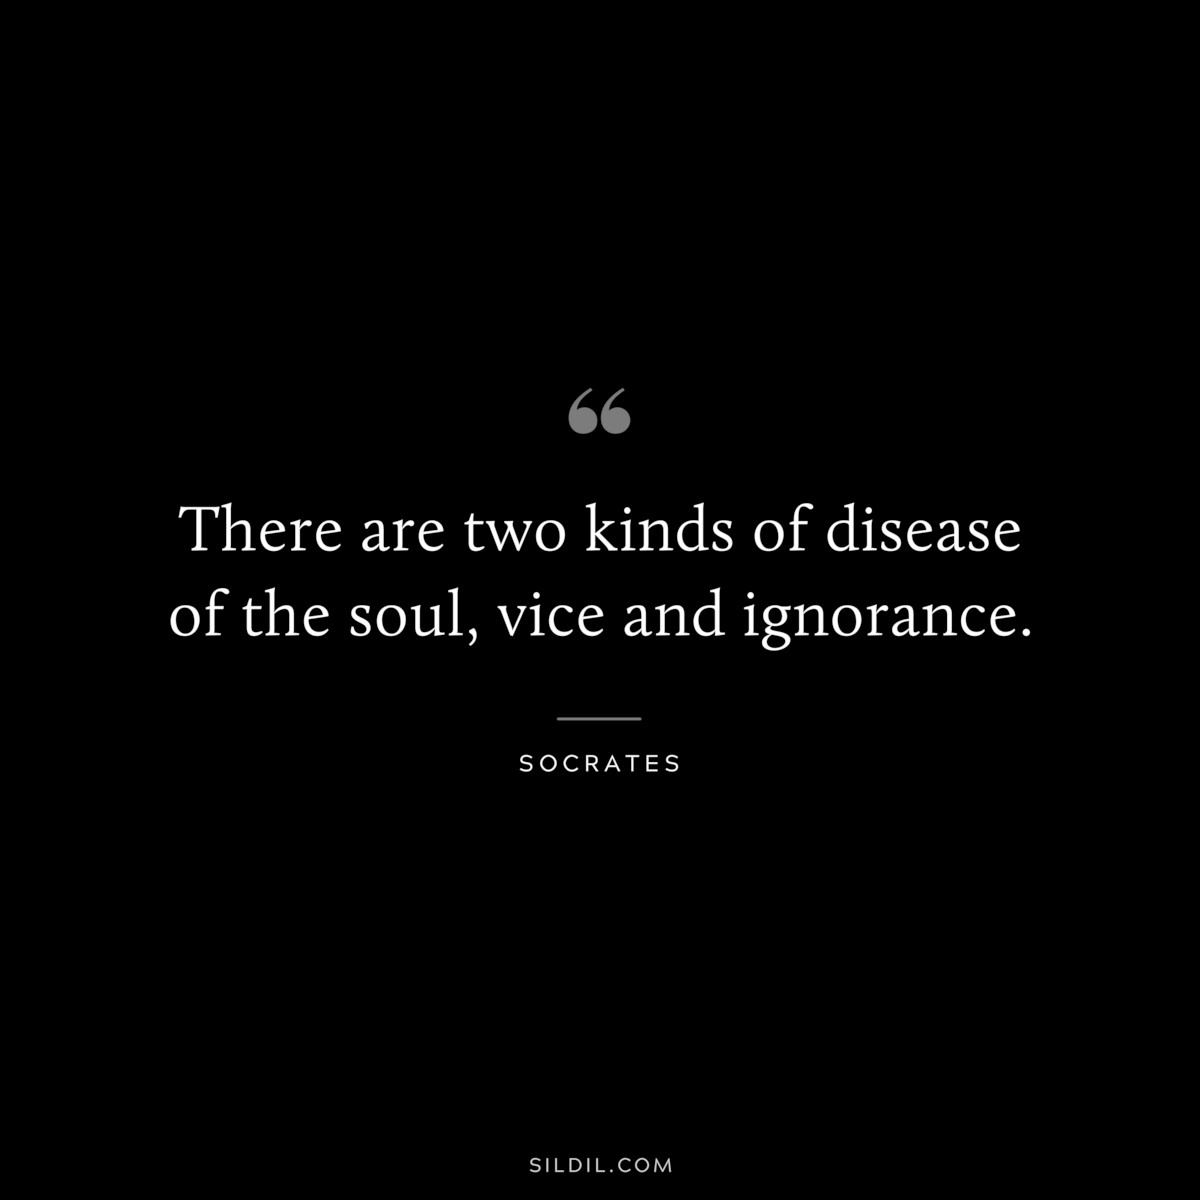 There are two kinds of disease of the soul, vice and ignorance. ― Socrates